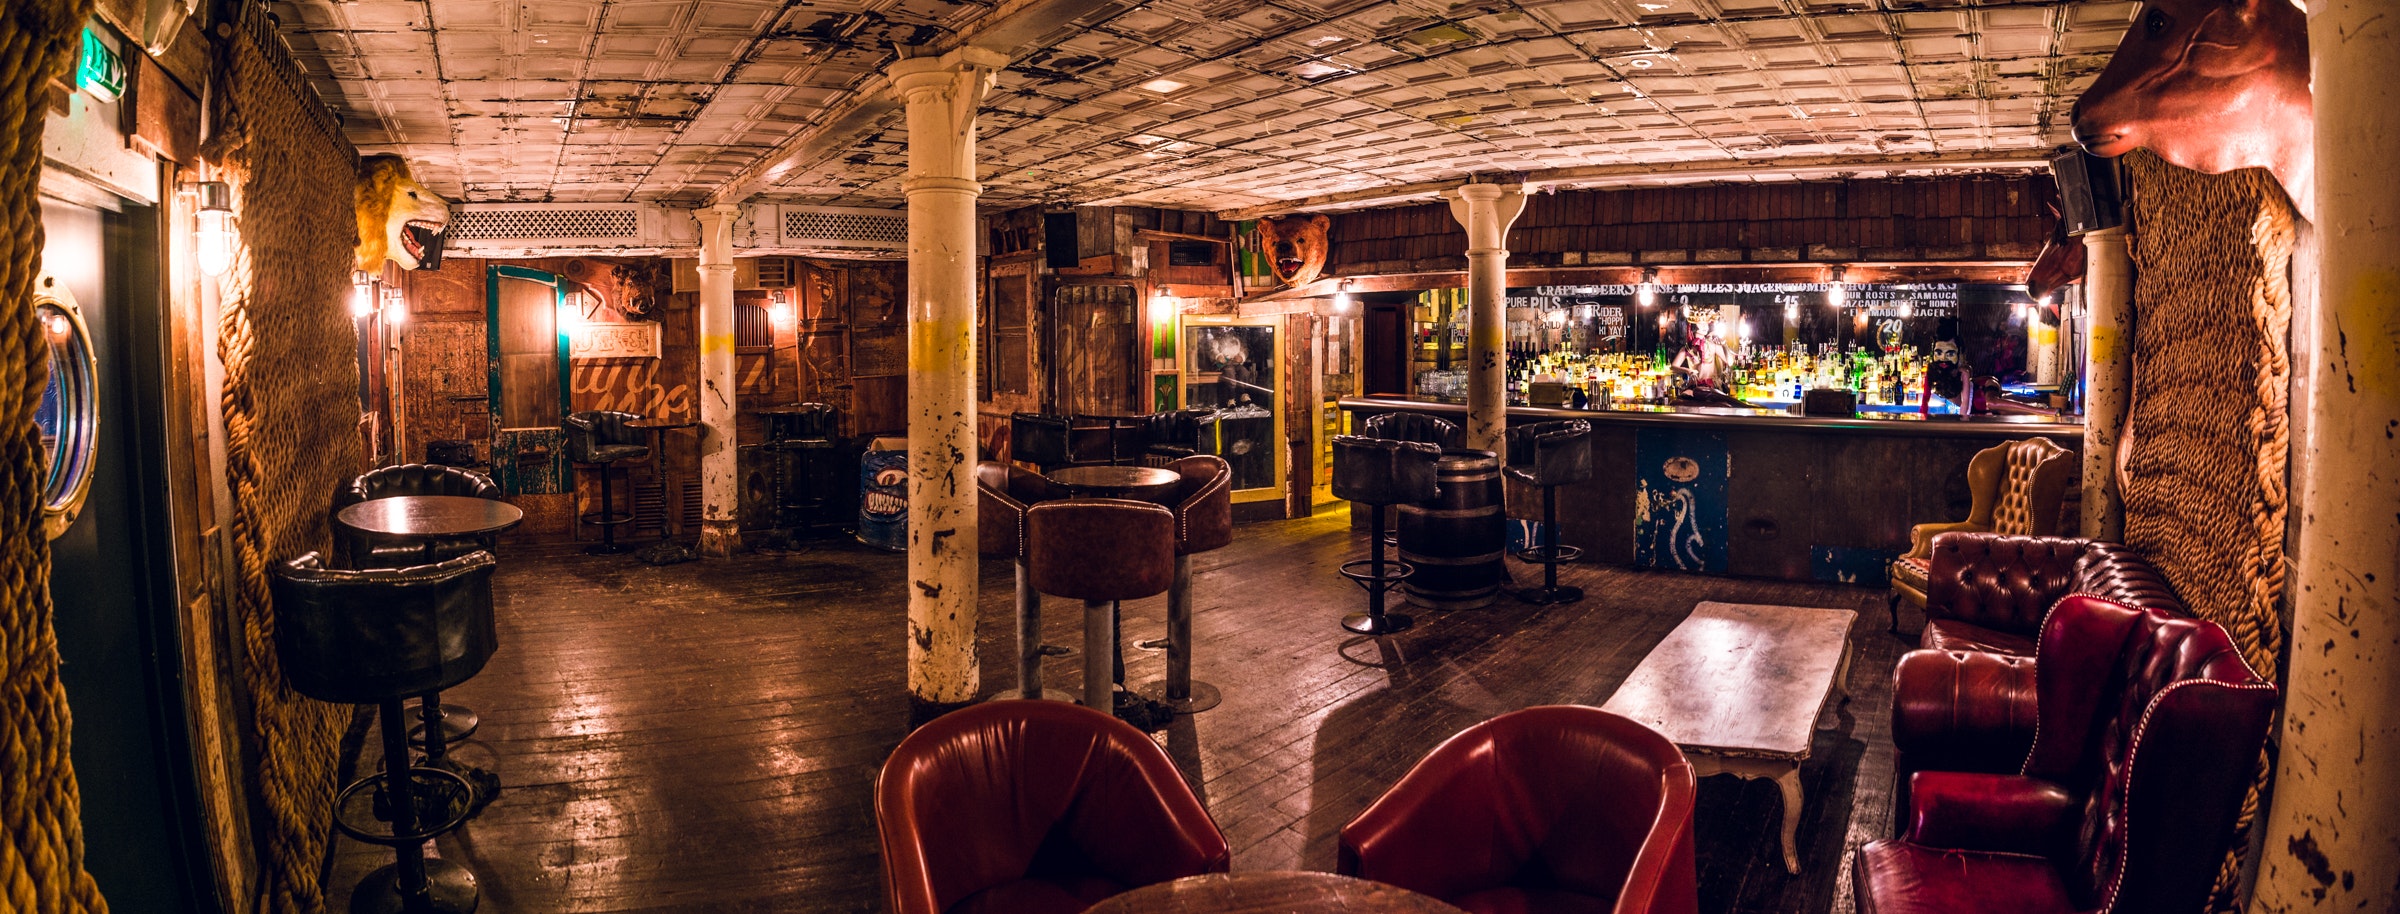 Affordable Private Dining Rooms Venues in London - The Blues Kitchen Shoreditch 